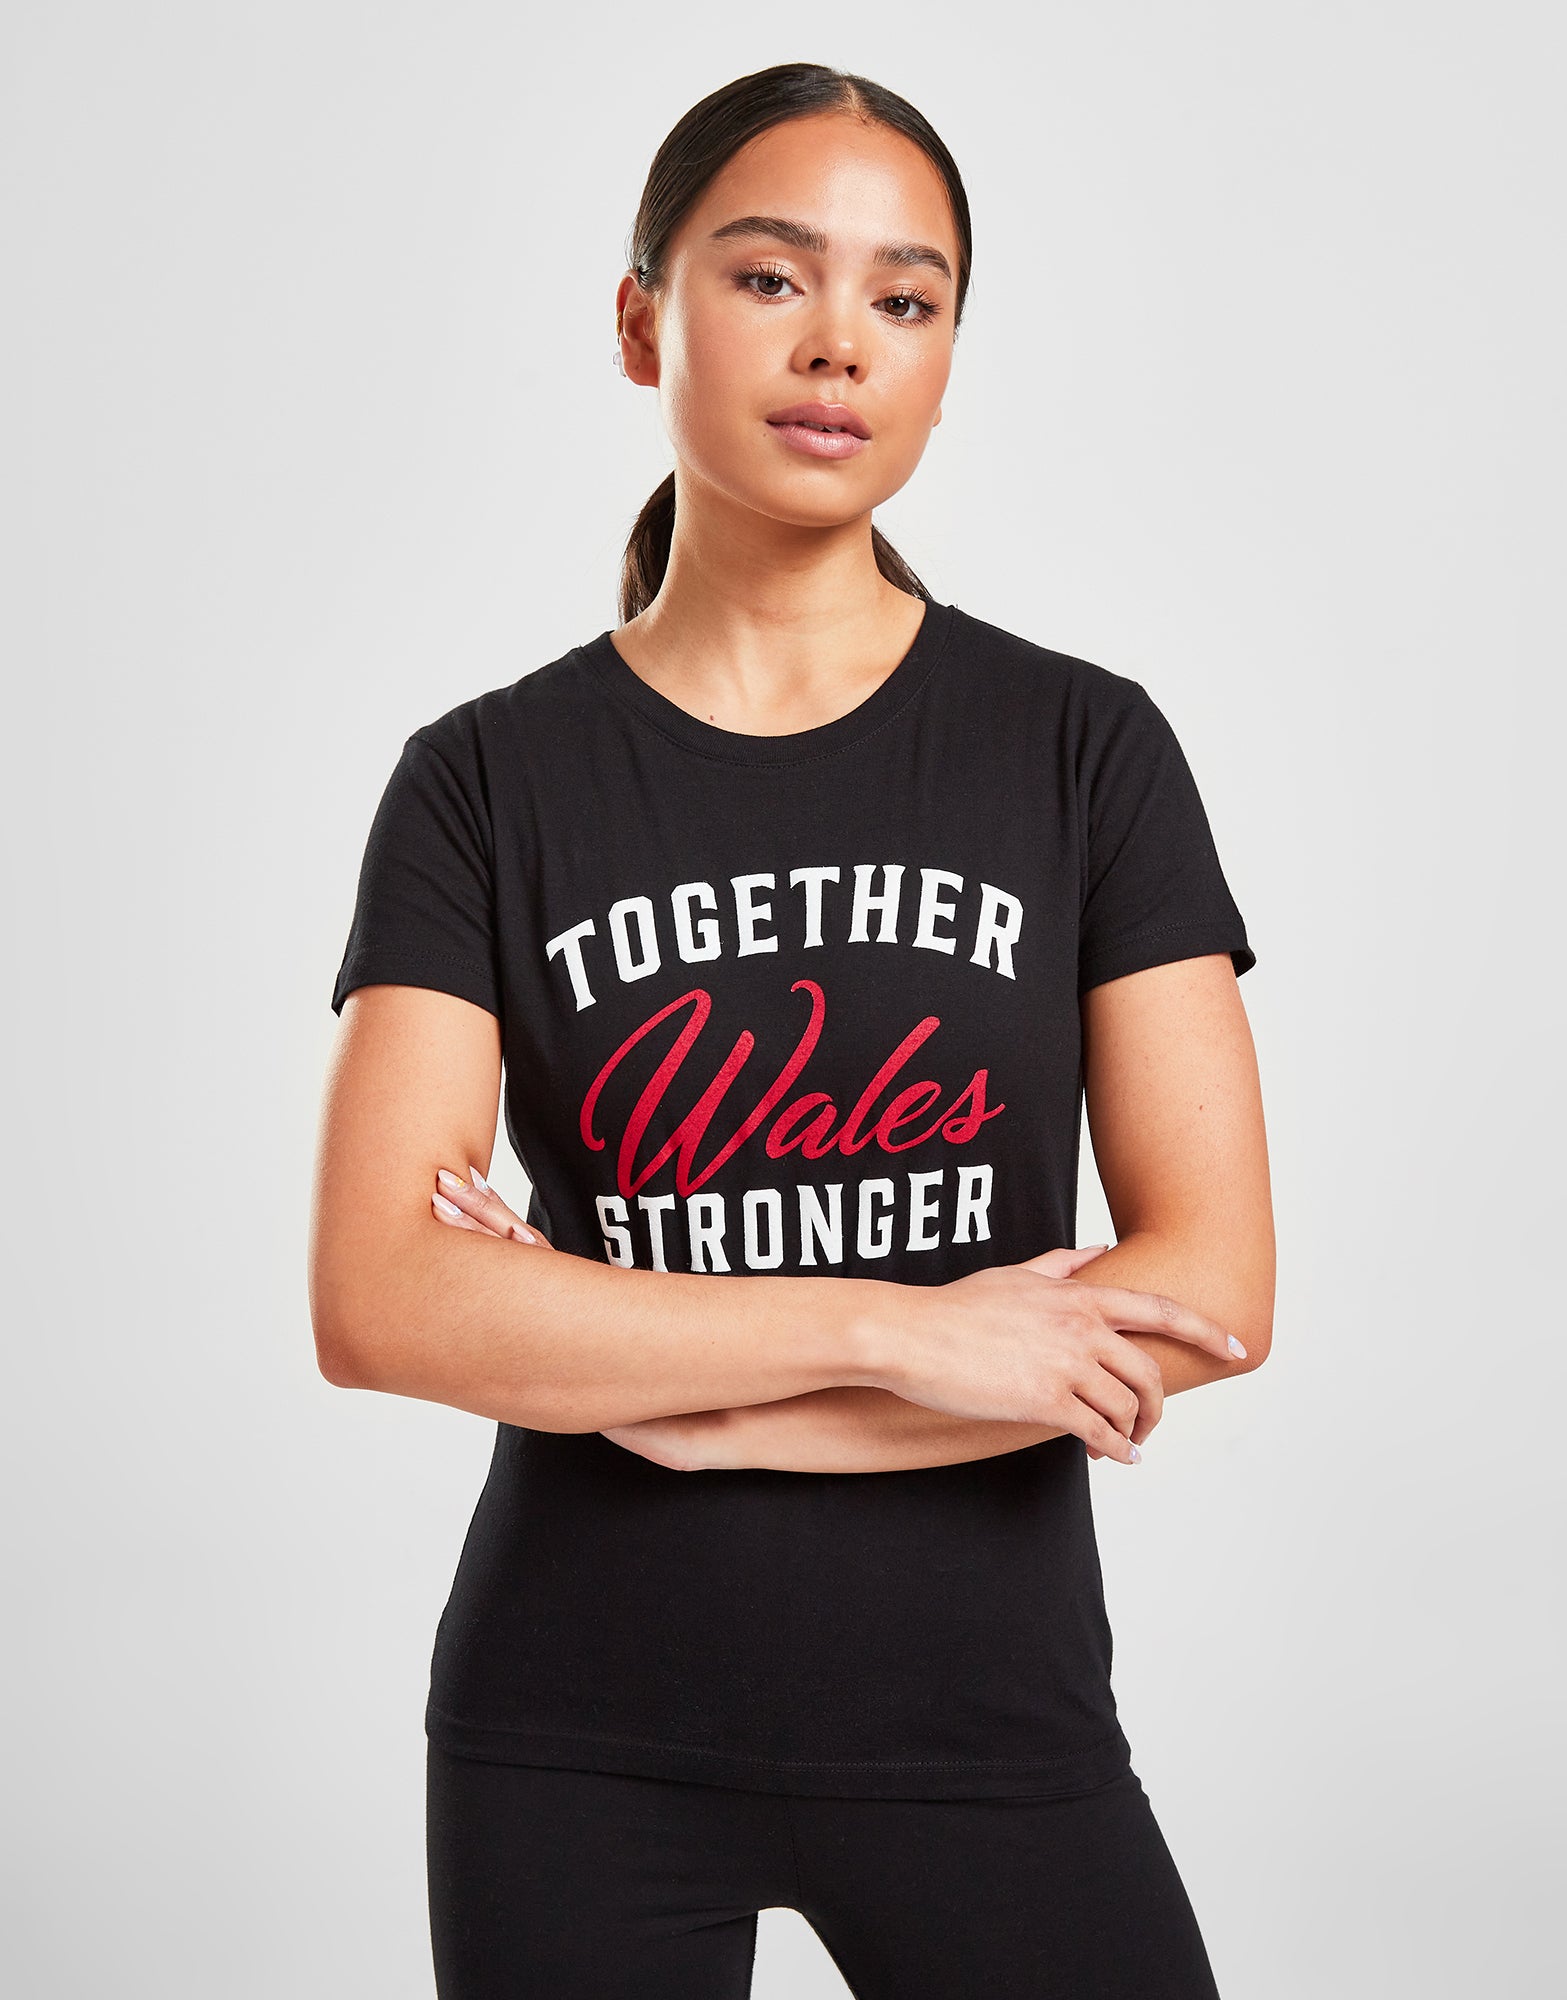 Official Team Wales Womens 'Together Stronger' T-Shirt - Black